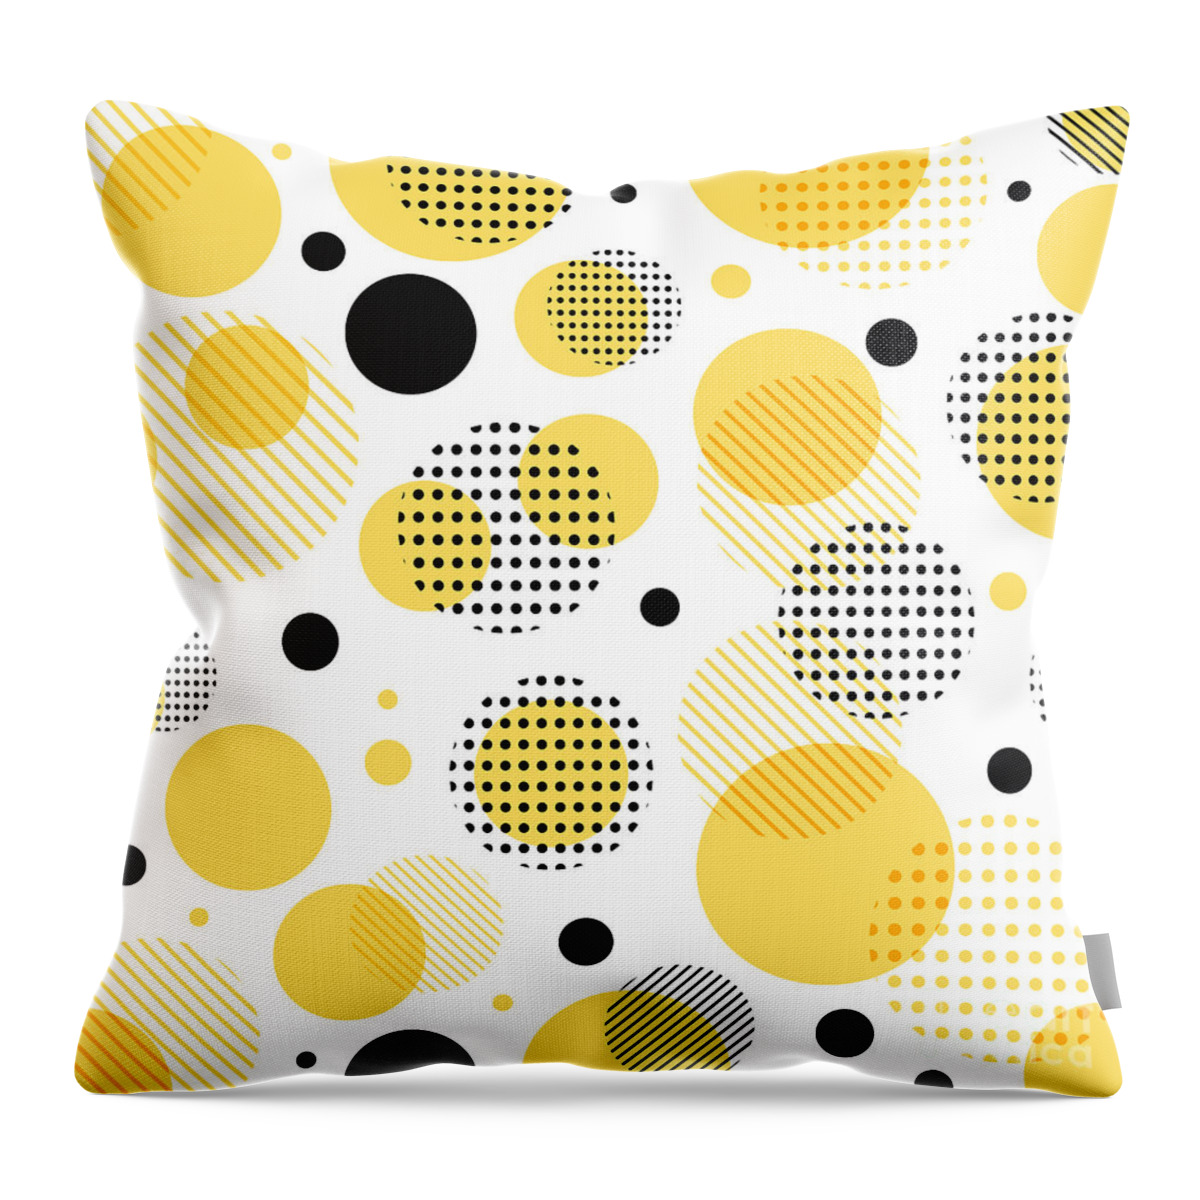 Hipster Throw Pillow featuring the digital art Abstract Modern Yellow, Black Dots by Phochi